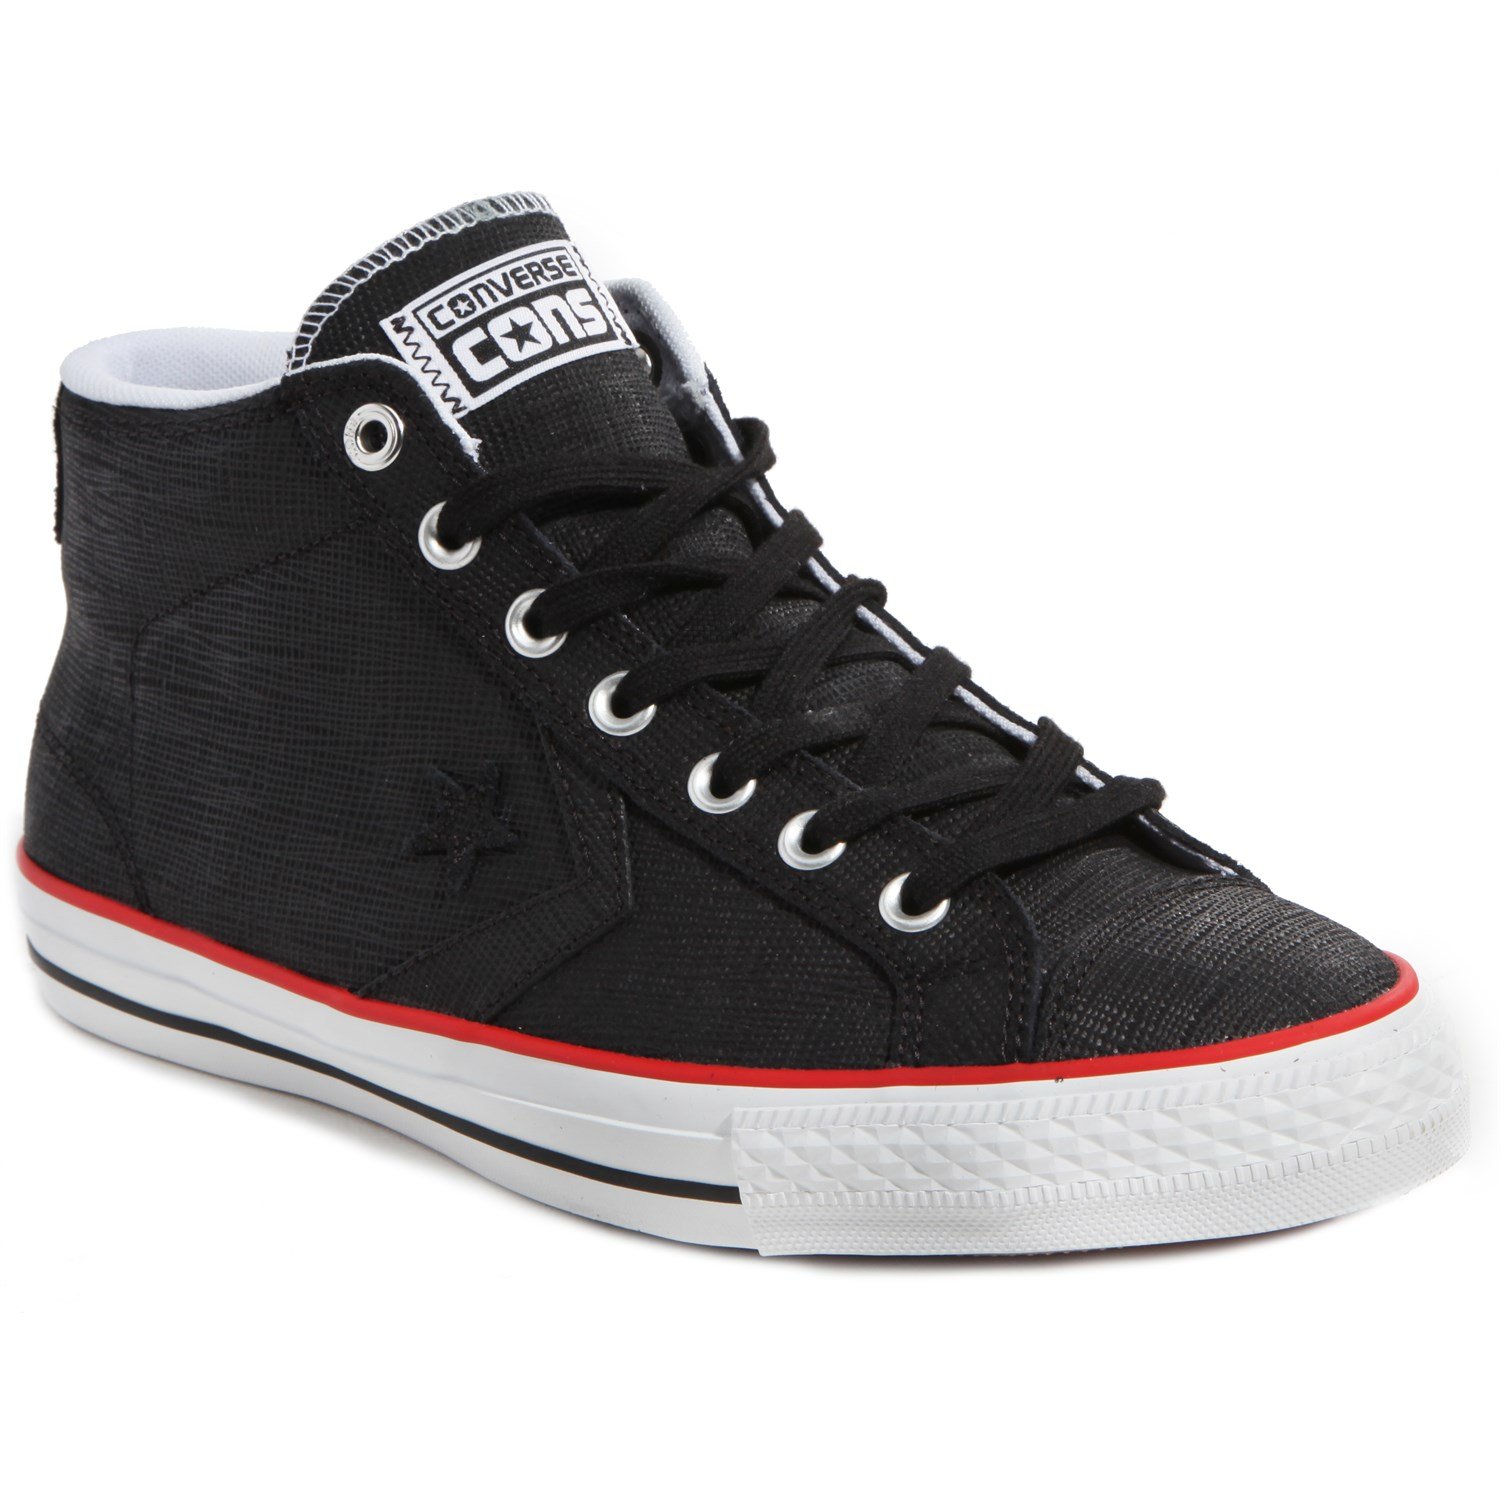 Converse Player Skate Mid Shoes | evo